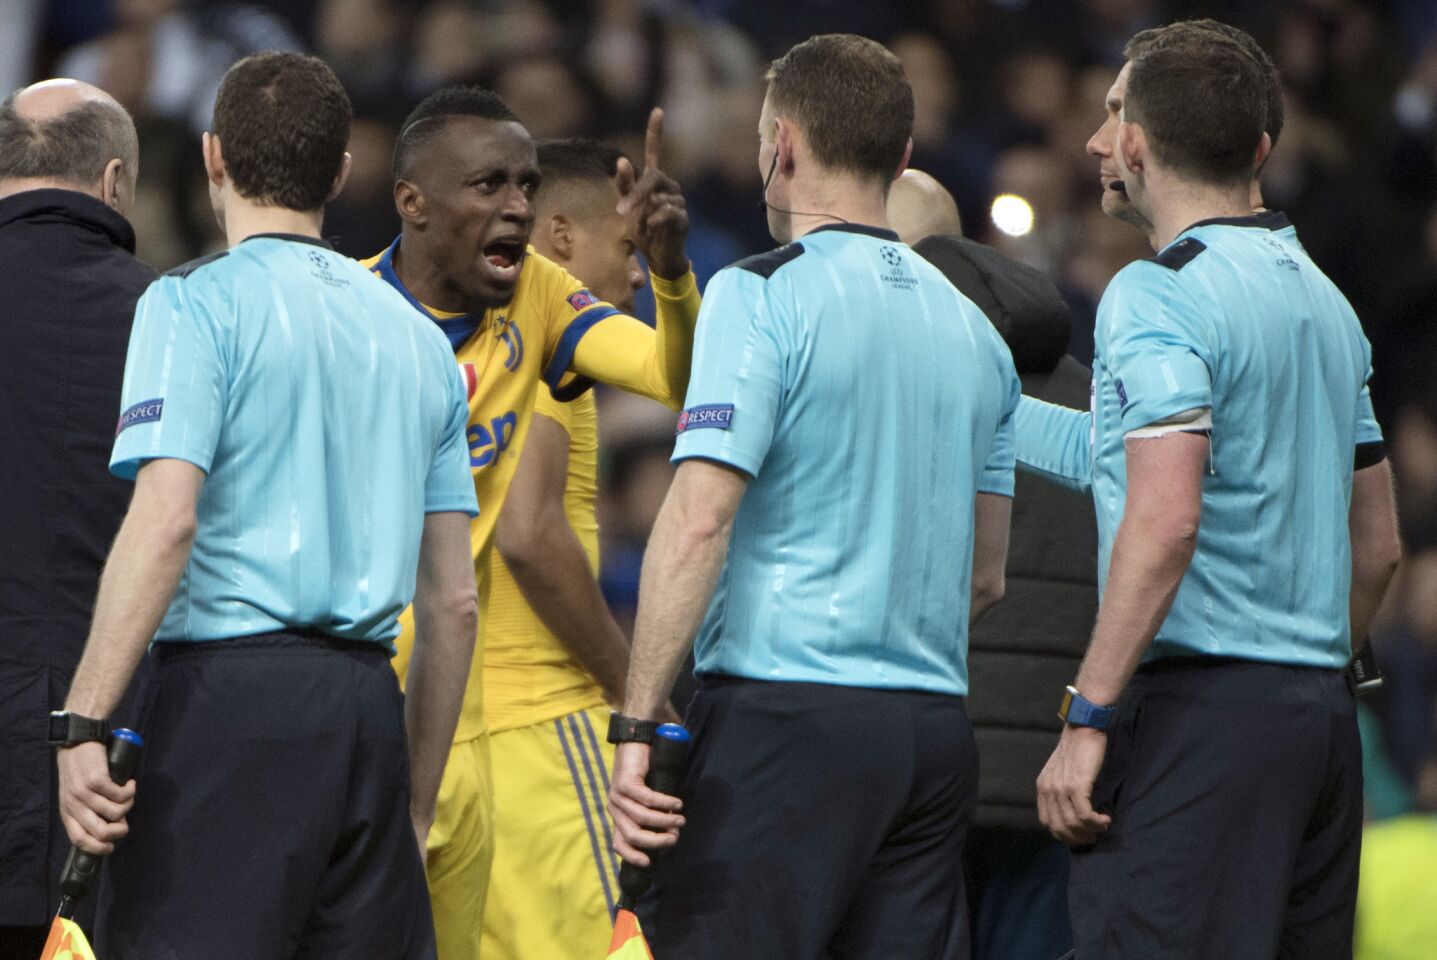 Juventus' French midfielder Blaise Matuidi (L) protests to referee during the UEFA Champions League quarter-final second leg football match between Real Madrid CF and Juventus FC at the Santiago Bernabeu stadium in Madrid on April 11, 2018. / AFP PHOTO / CURTO DE LA TORRECURTO DE LA TORRE/AFP/Getty Images ** OUTS - ELSENT, FPG, CM - OUTS * NM, PH, VA if sourced by CT, LA or MoD **